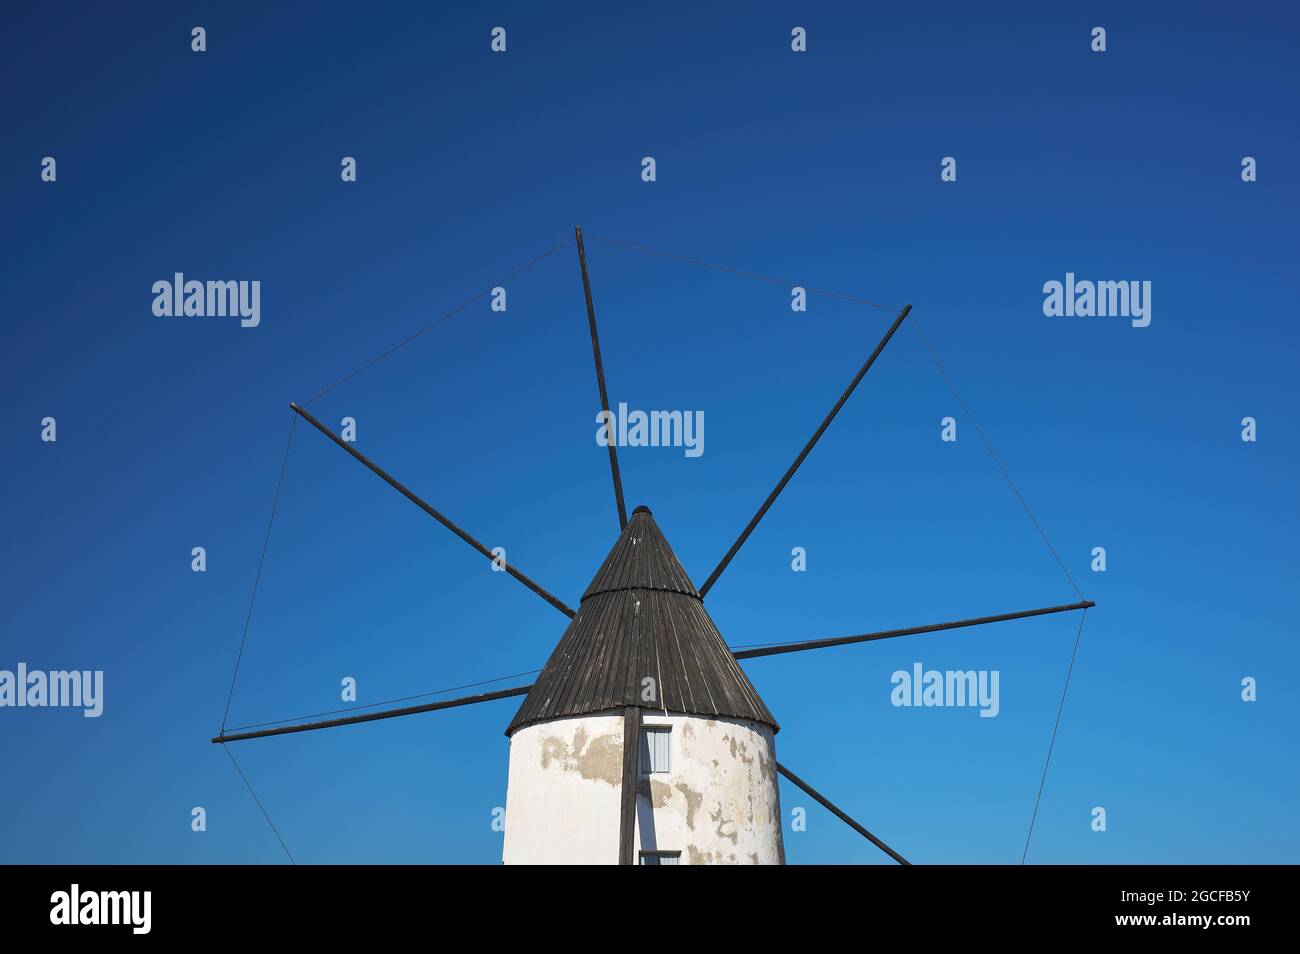 detail of an old windmill with blades over blue sky Stock Photo